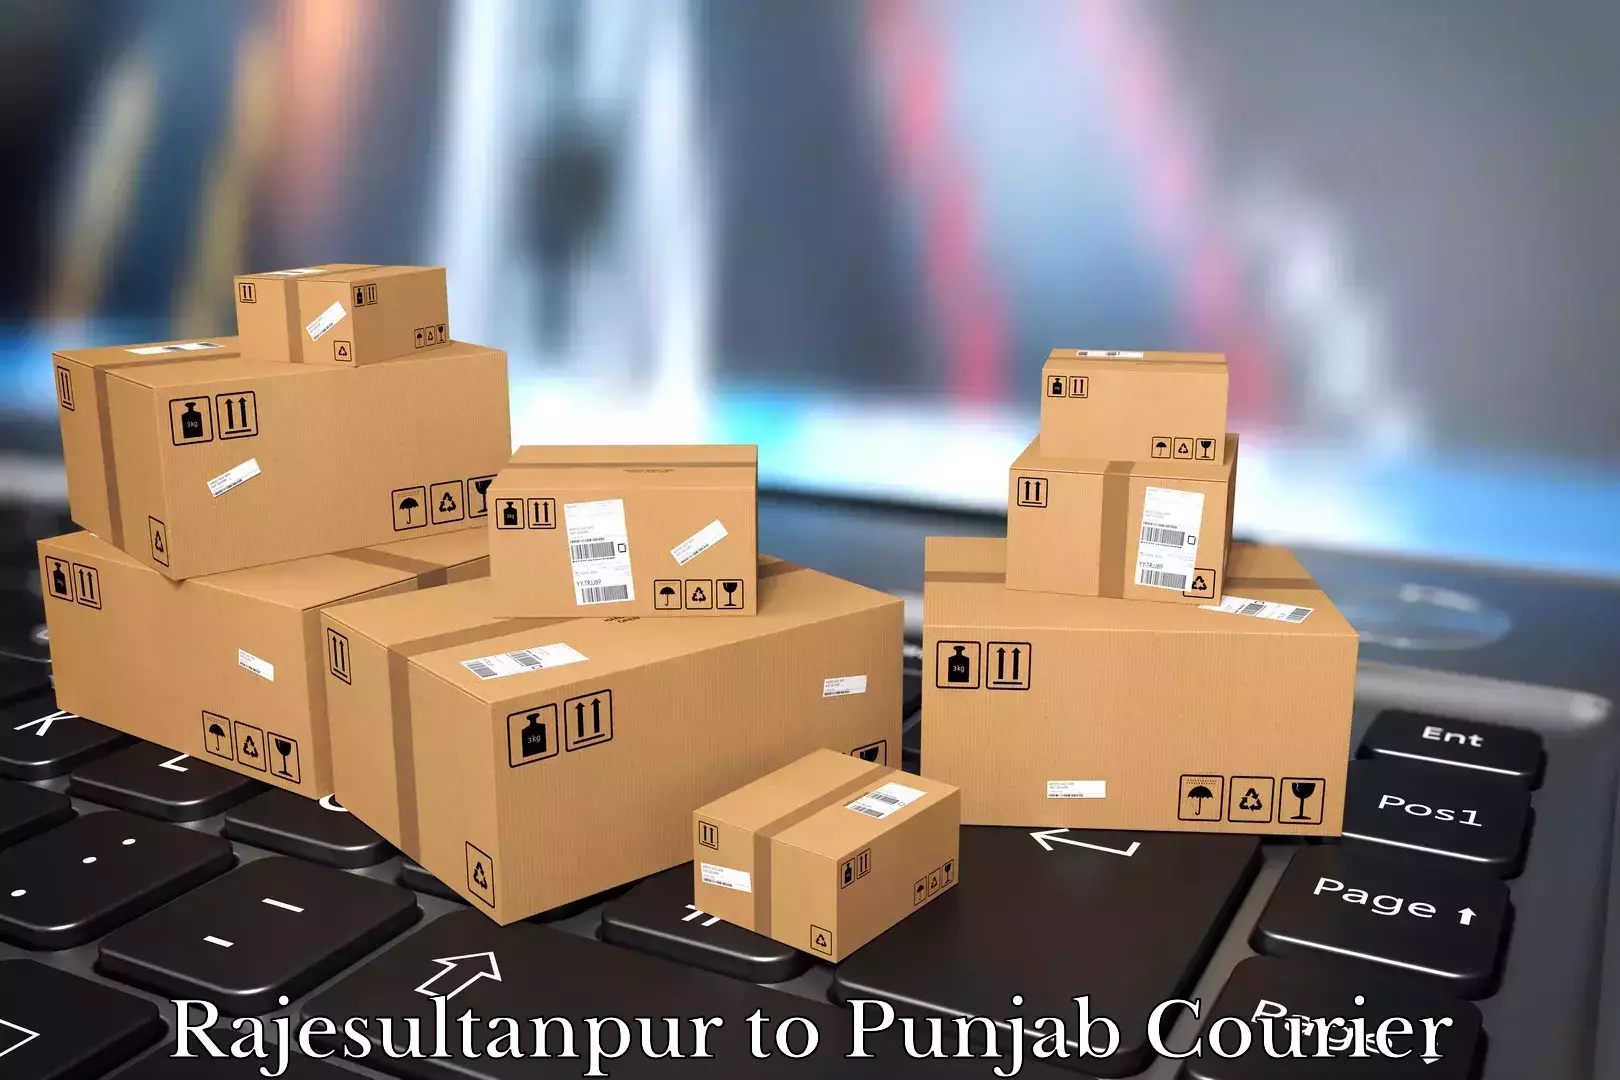 Furniture moving experts in Rajesultanpur to Mohali